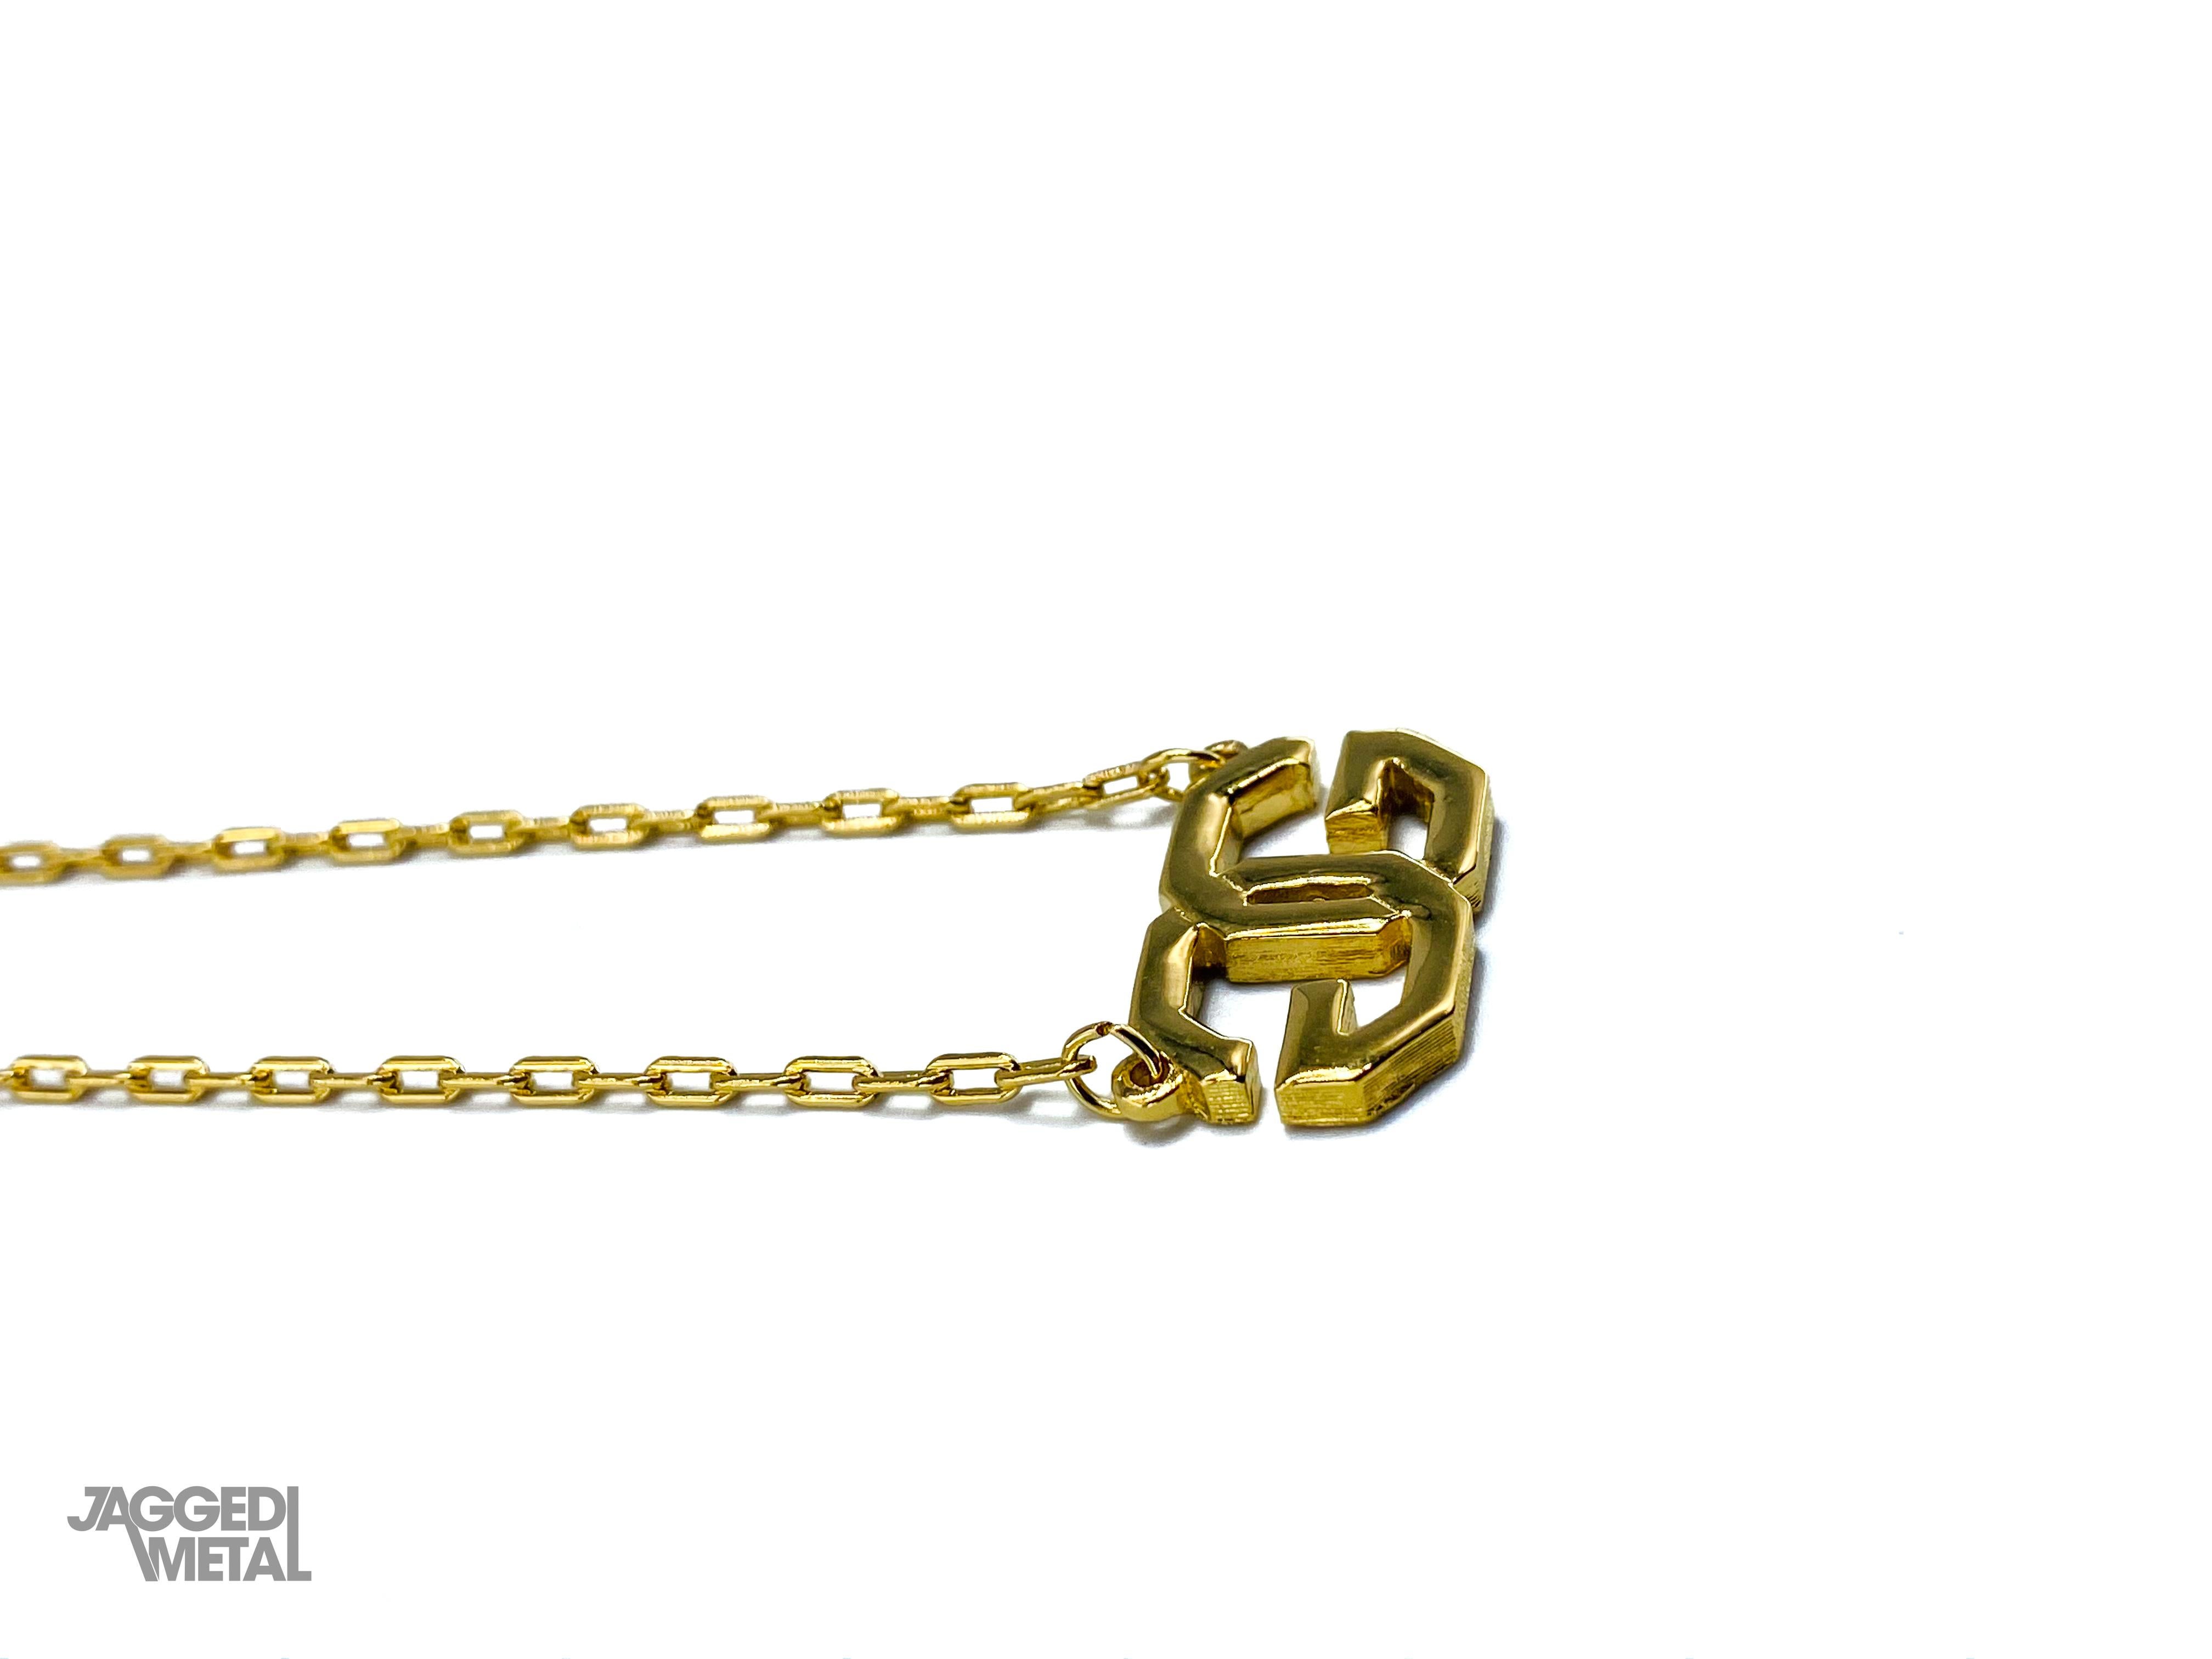 Givenchy Necklace Vintage 1970s

A super cool chain and pendant from the Givenchy 1970s archive - their hey day of jewellery when pieces were made with great quality and care

Detail
-Made in France in the 1970s
-Crafted from gold plated metal
-Fine